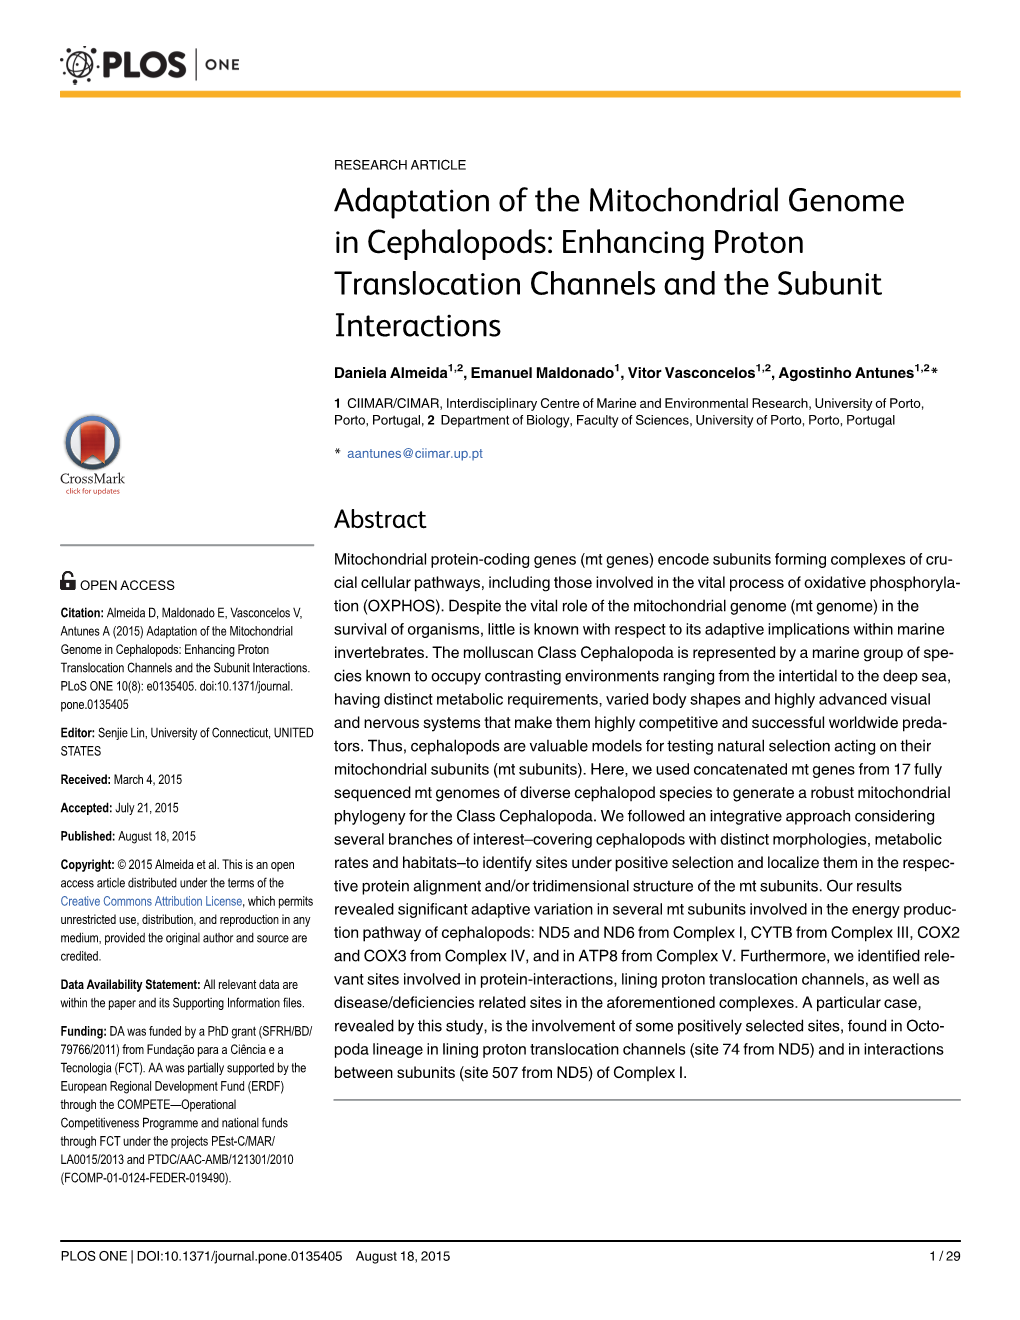 Adaptation of the Mitochondrial Genome in Cephalopods: Enhancing Proton Translocation Channels and the Subunit Interactions